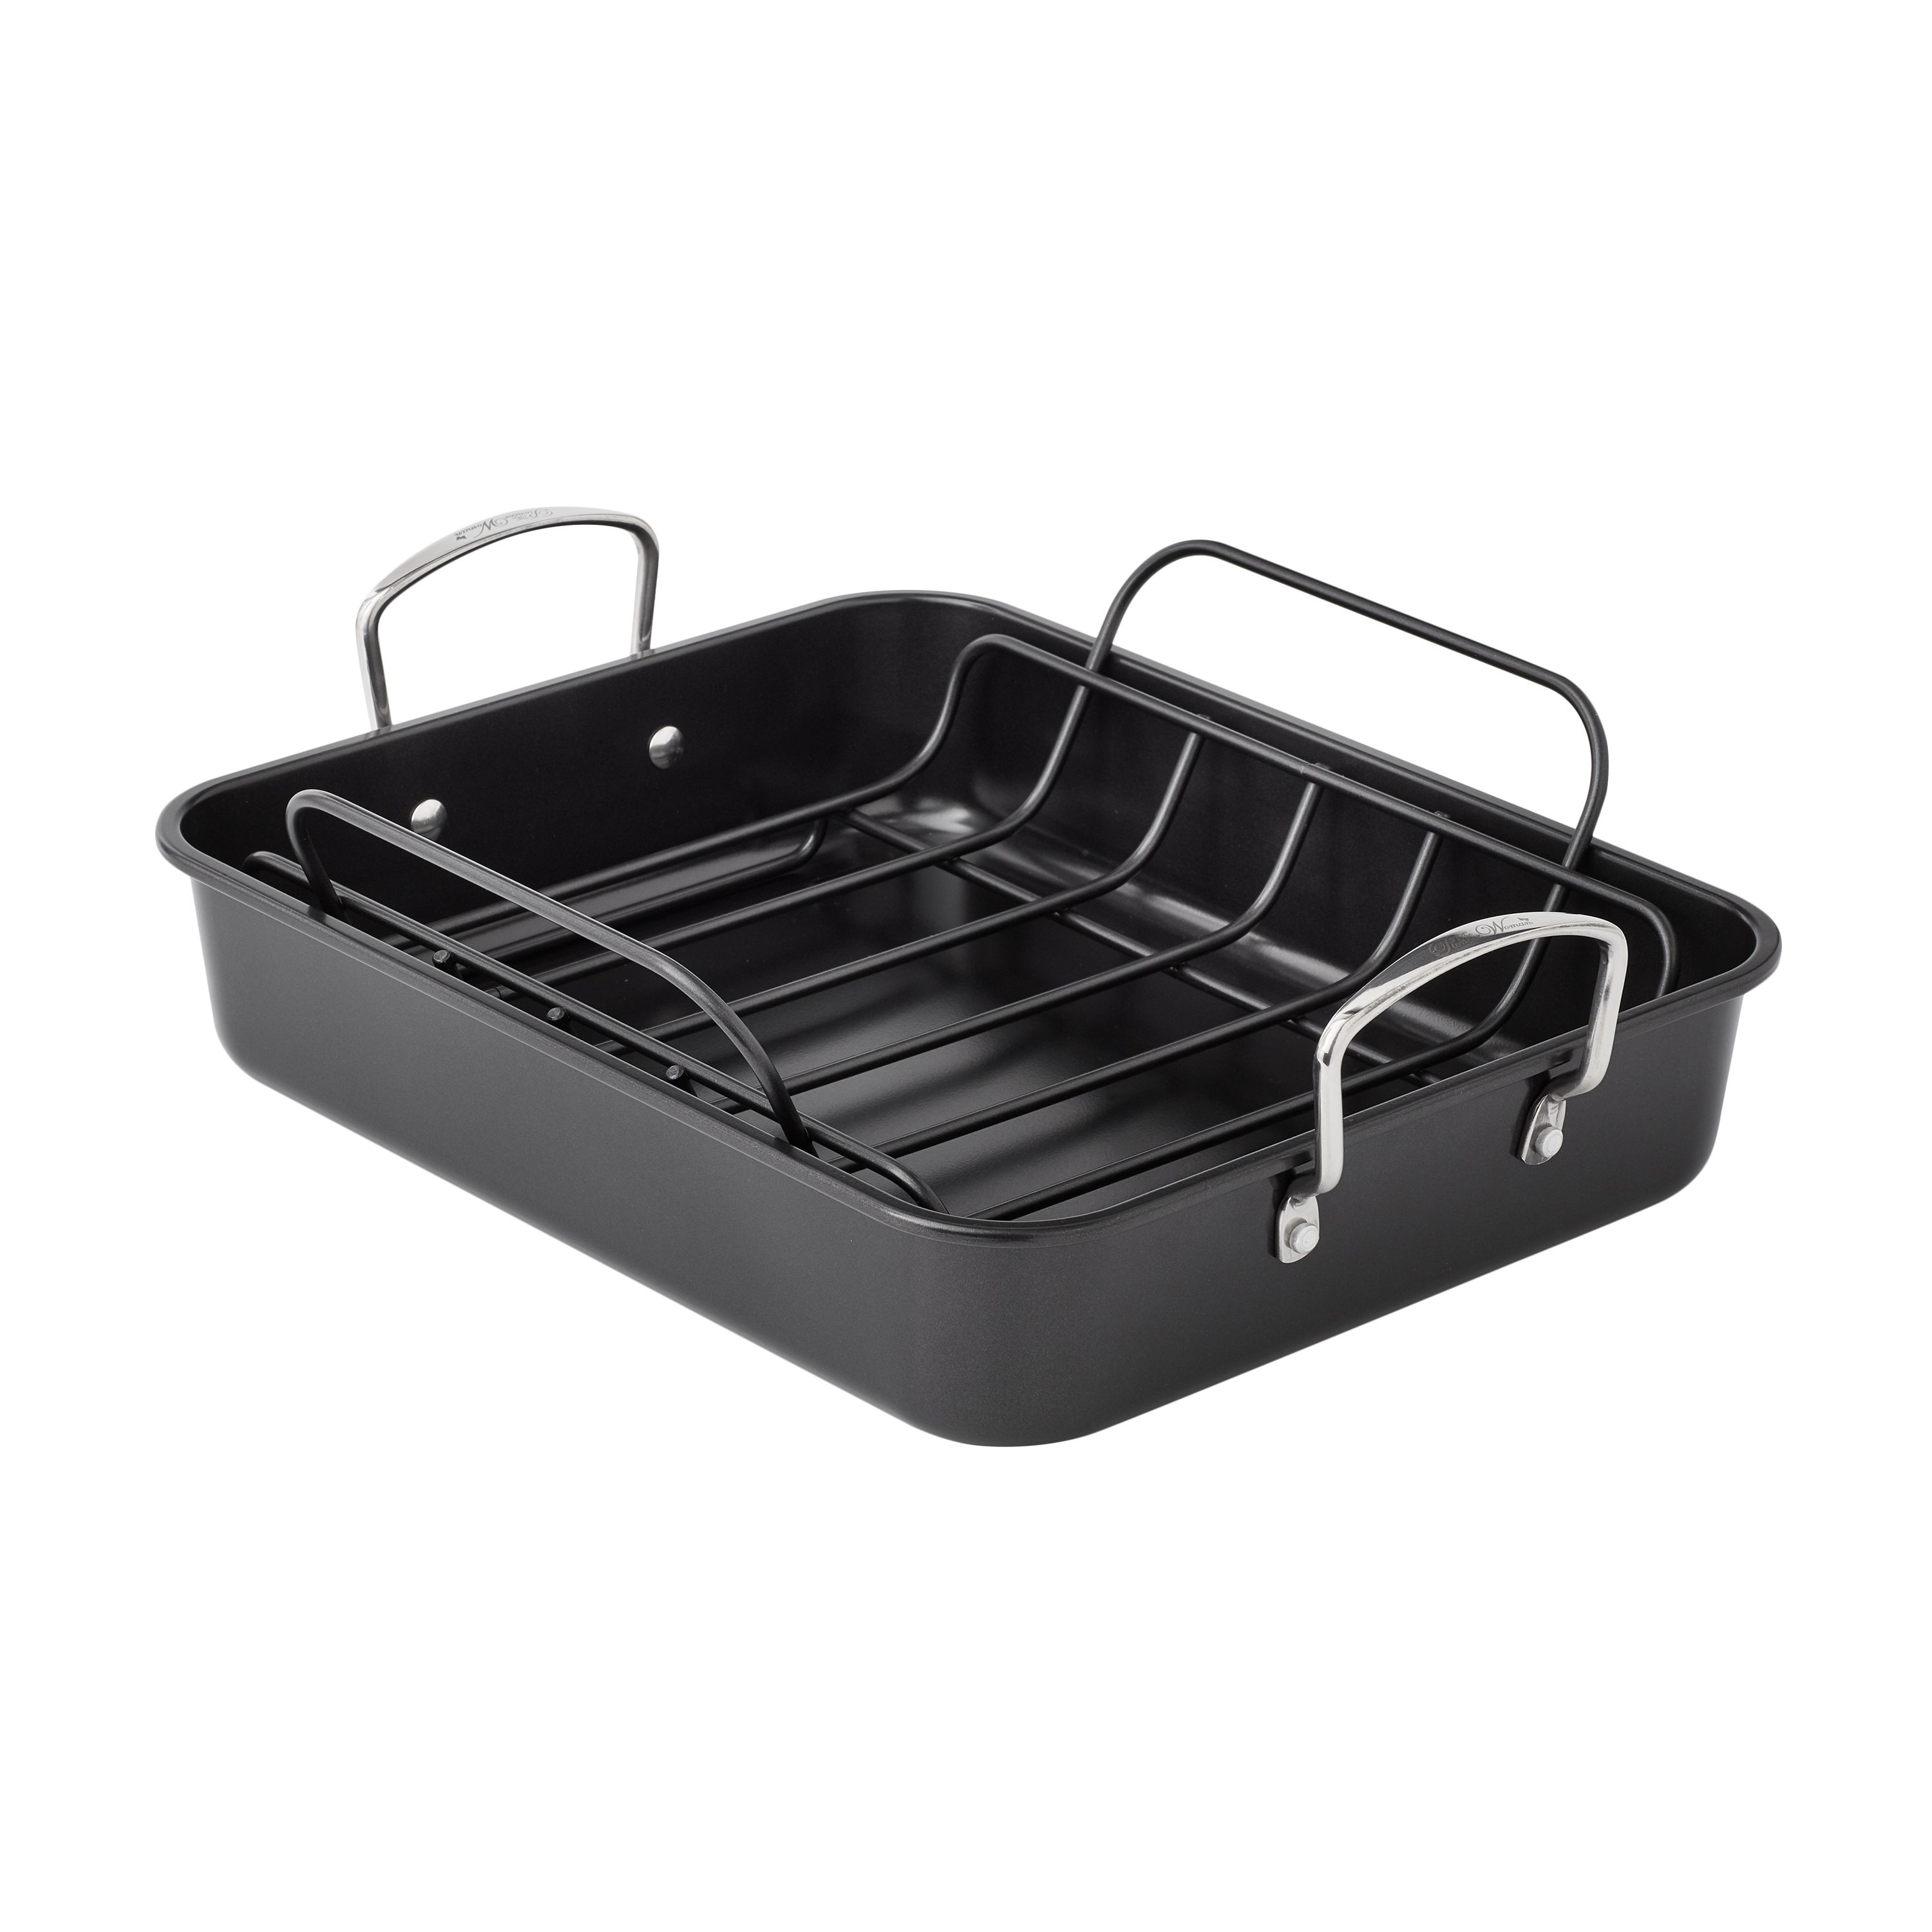 The Pioneer Woman Nonstick Roaster with Wire Rack